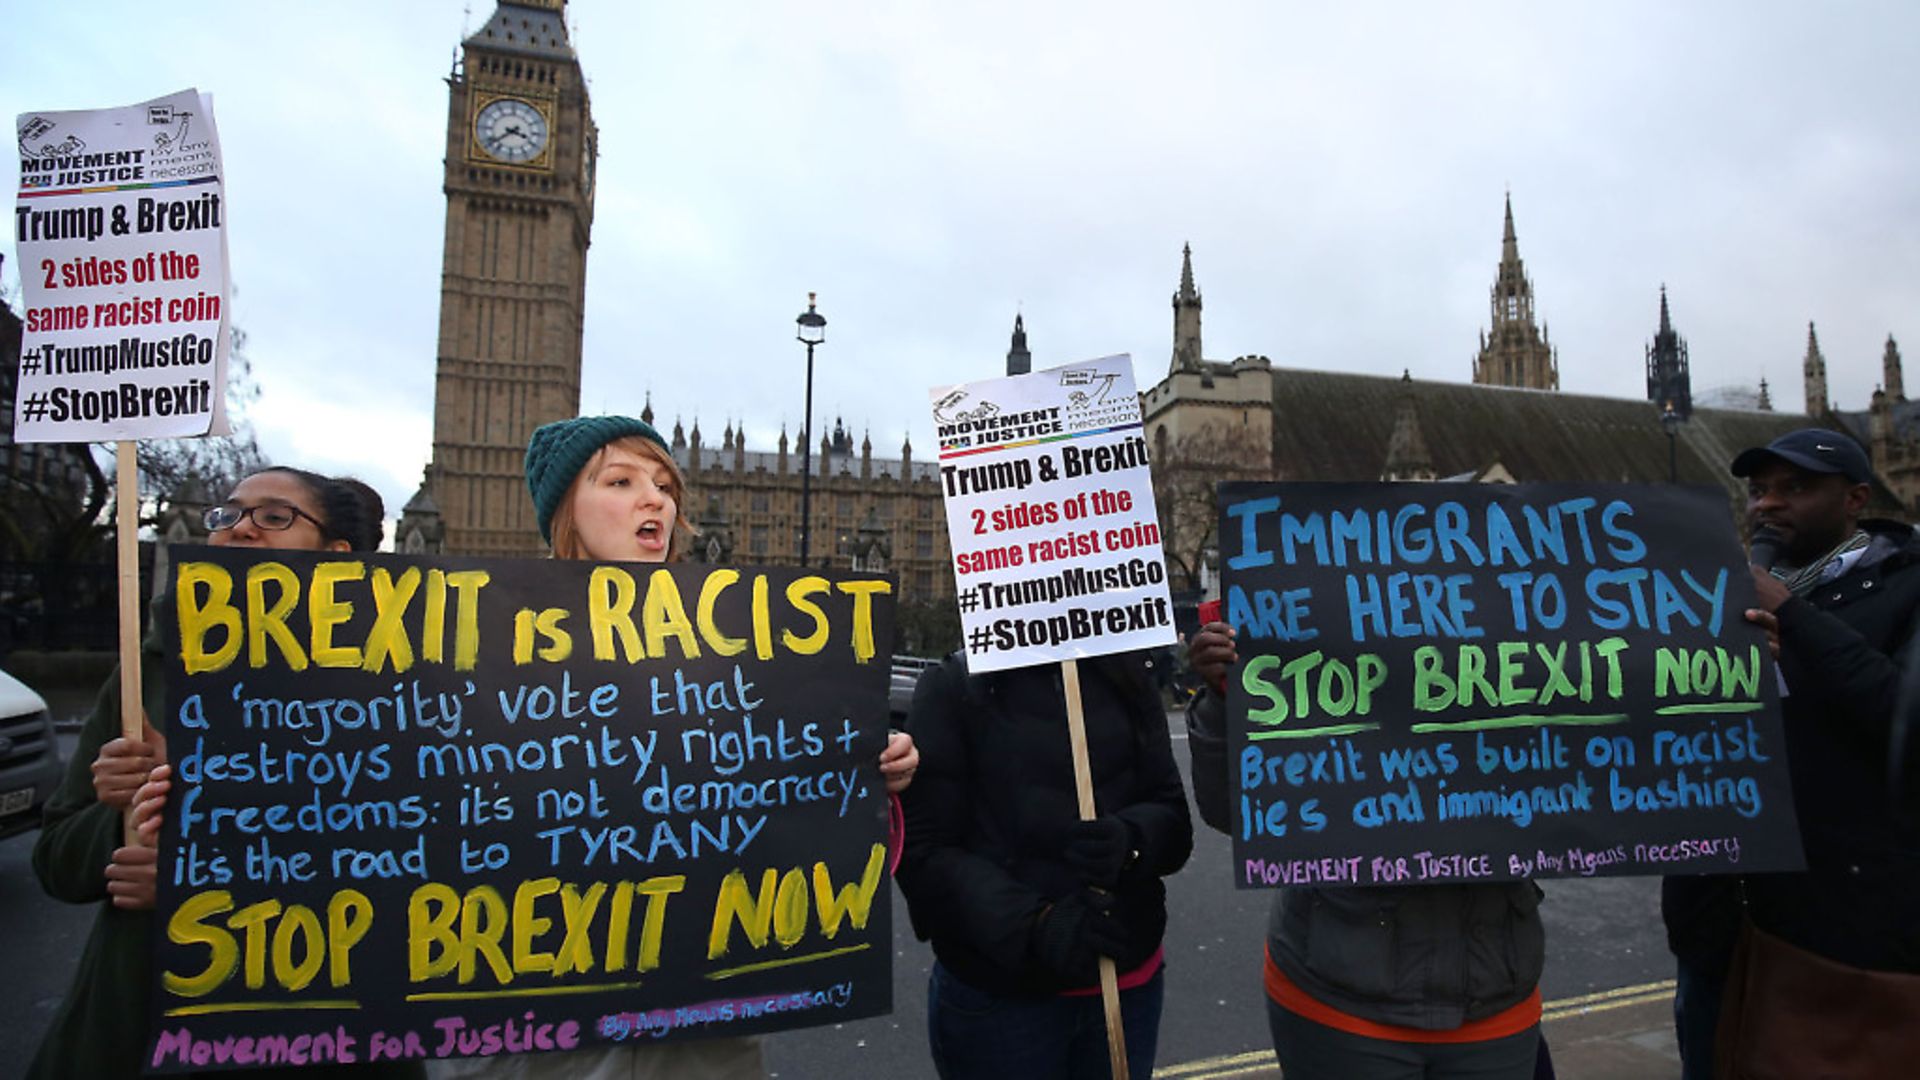 Anti Brexit demonstrators protest outside the Houses of Parliament - Credit: PA Wire/PA Images